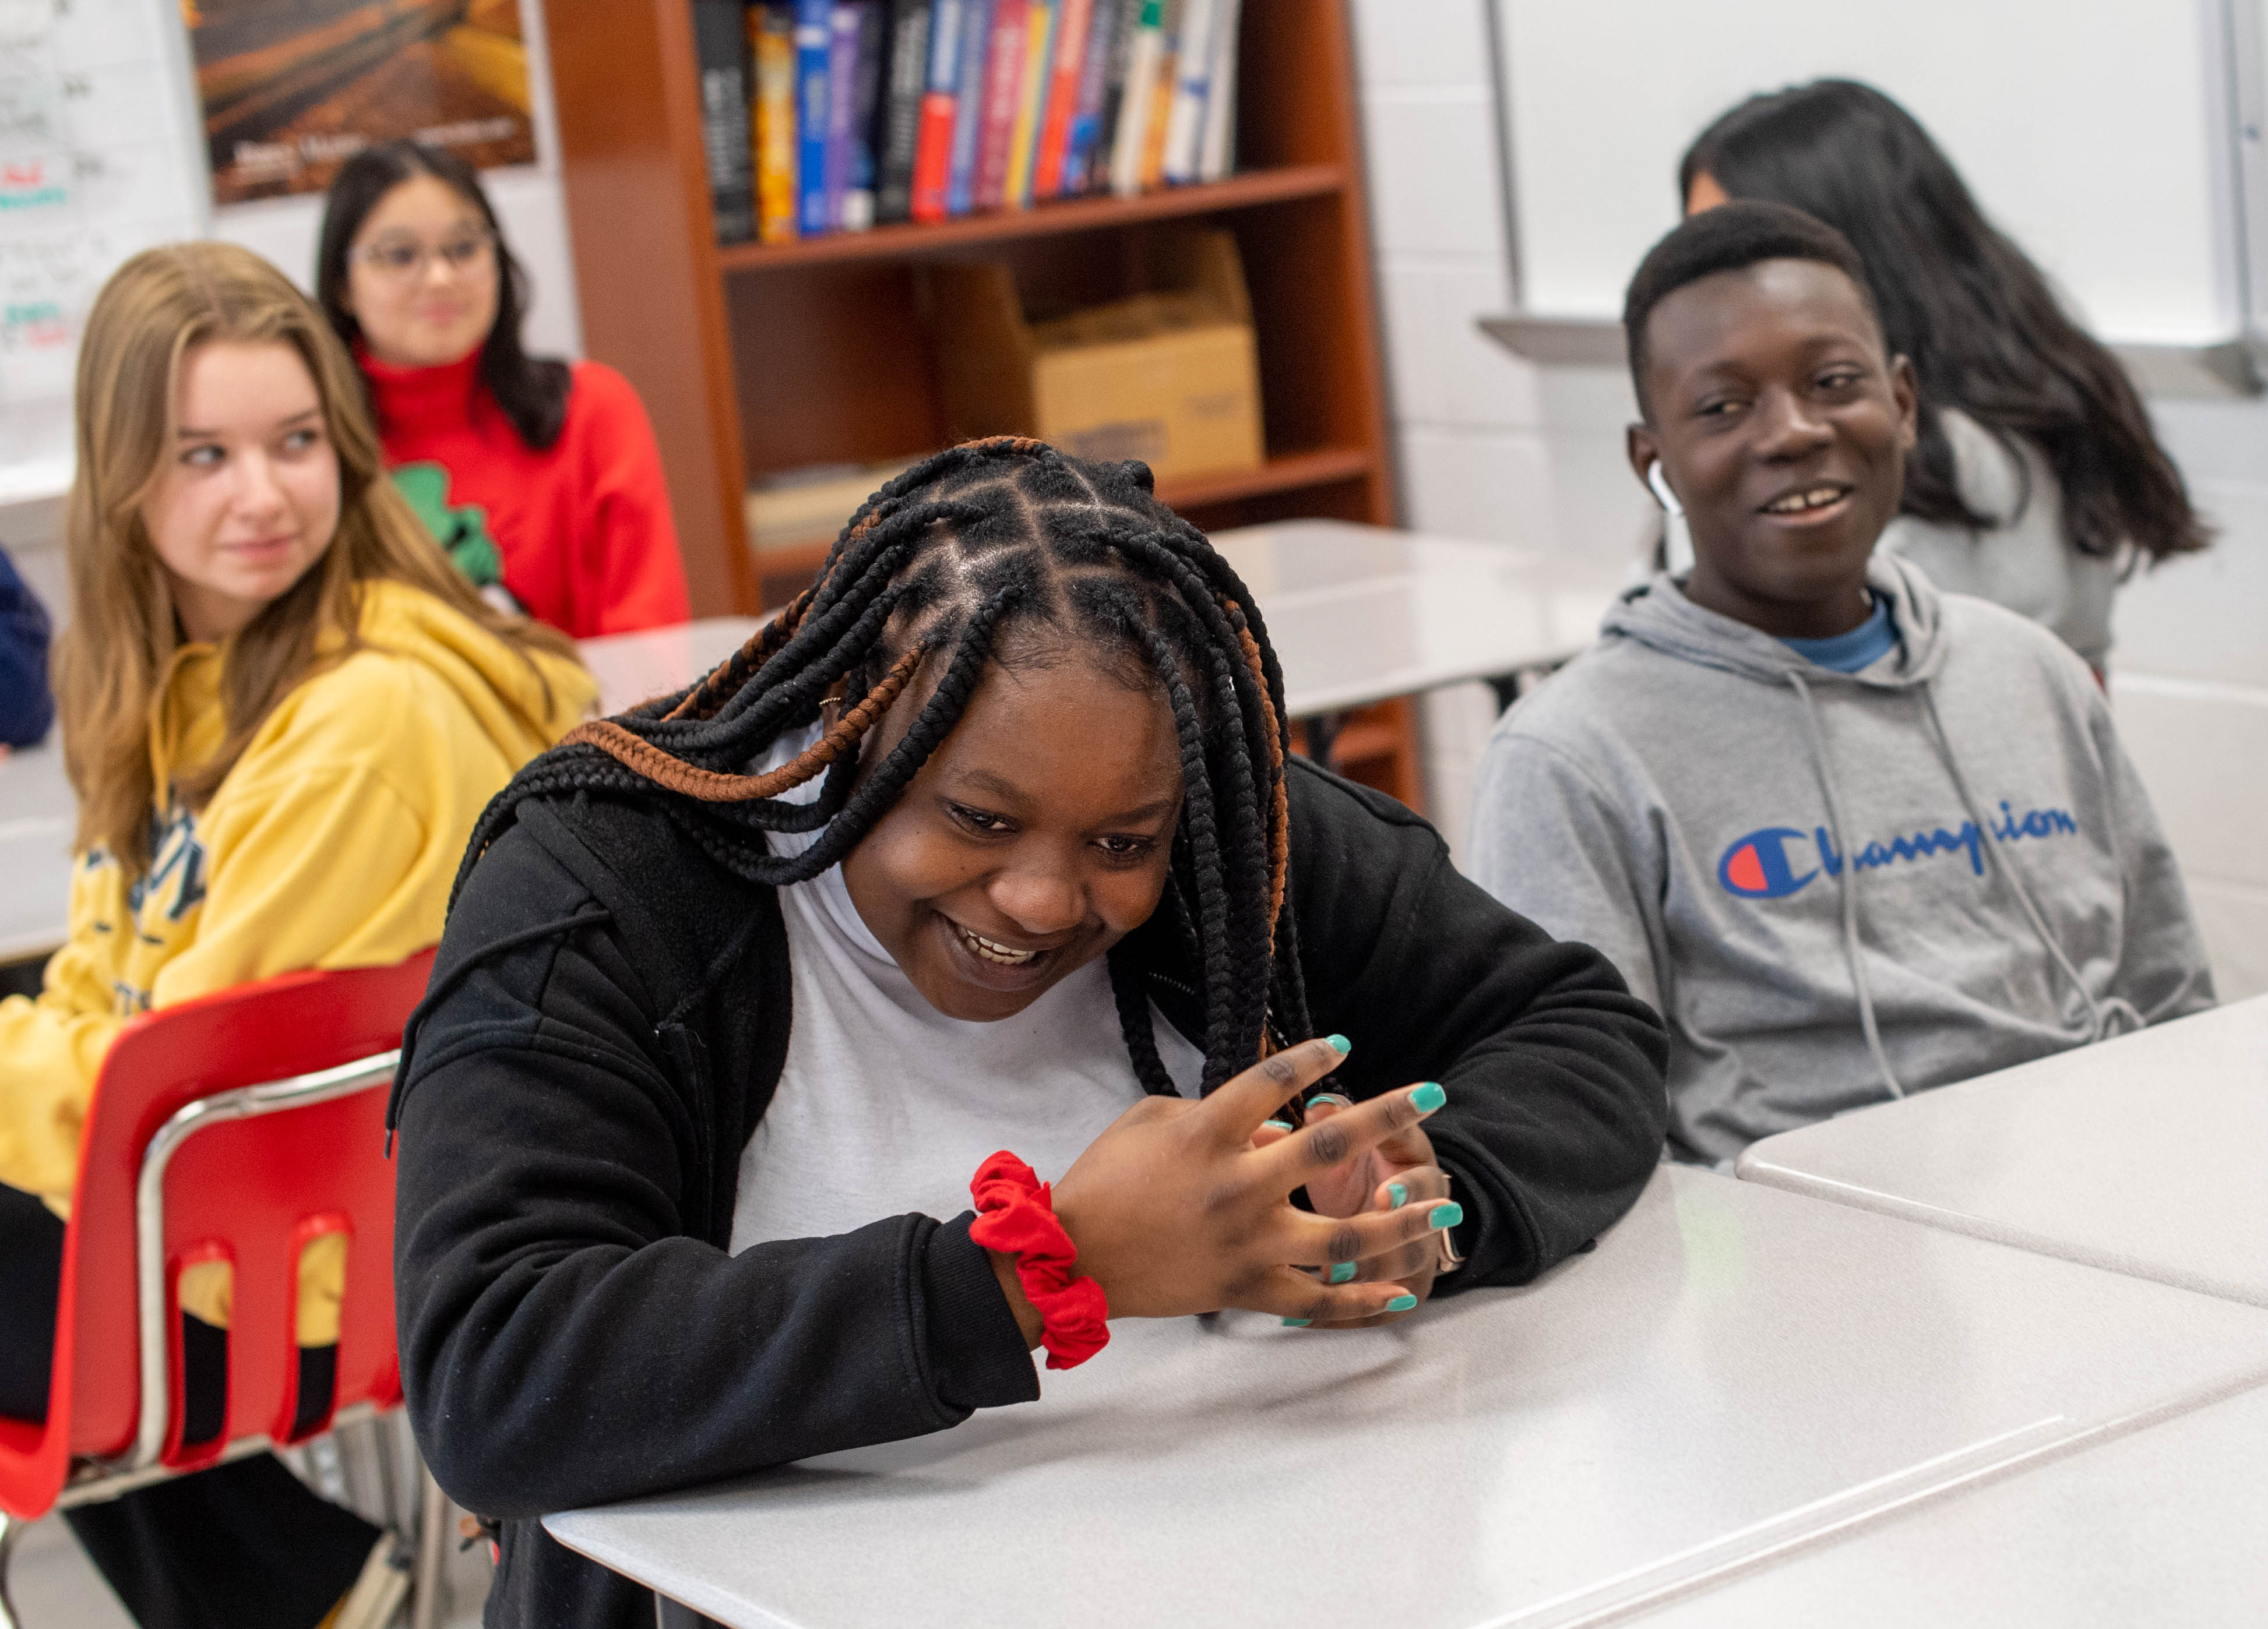 Annandale High School study abroad scholarship winners laugh and share goals during a meeting about summer program plans.